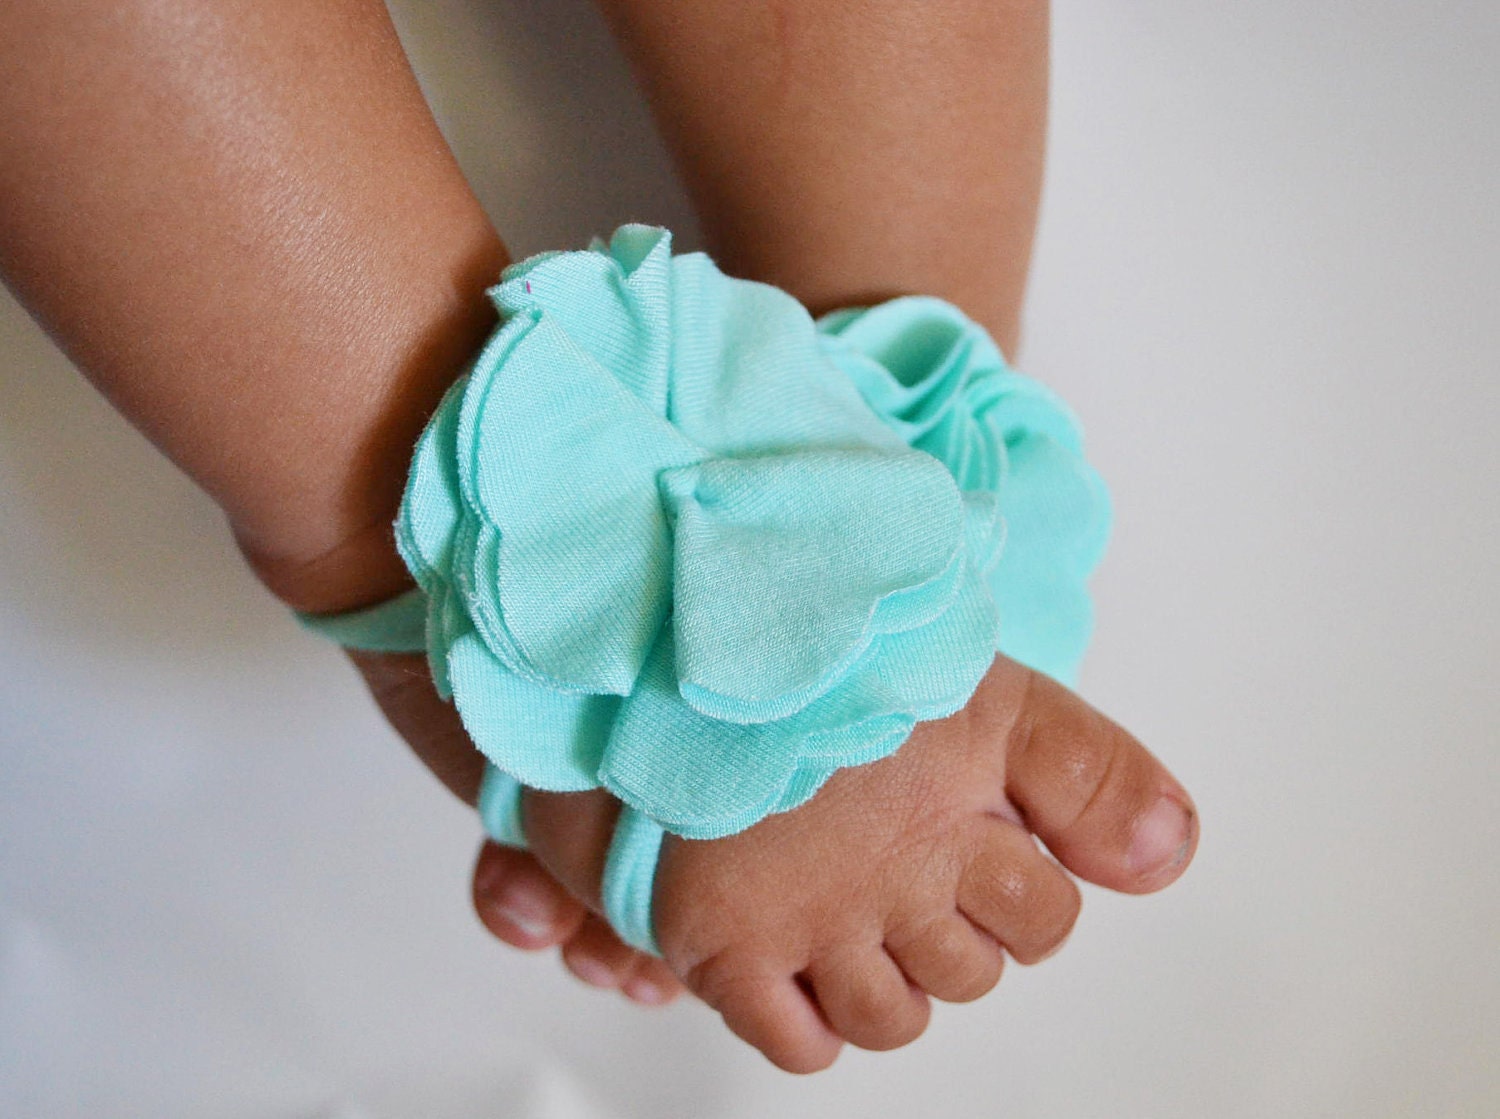 Items similar to Baby barefoot sandals- baby sandals on Etsy